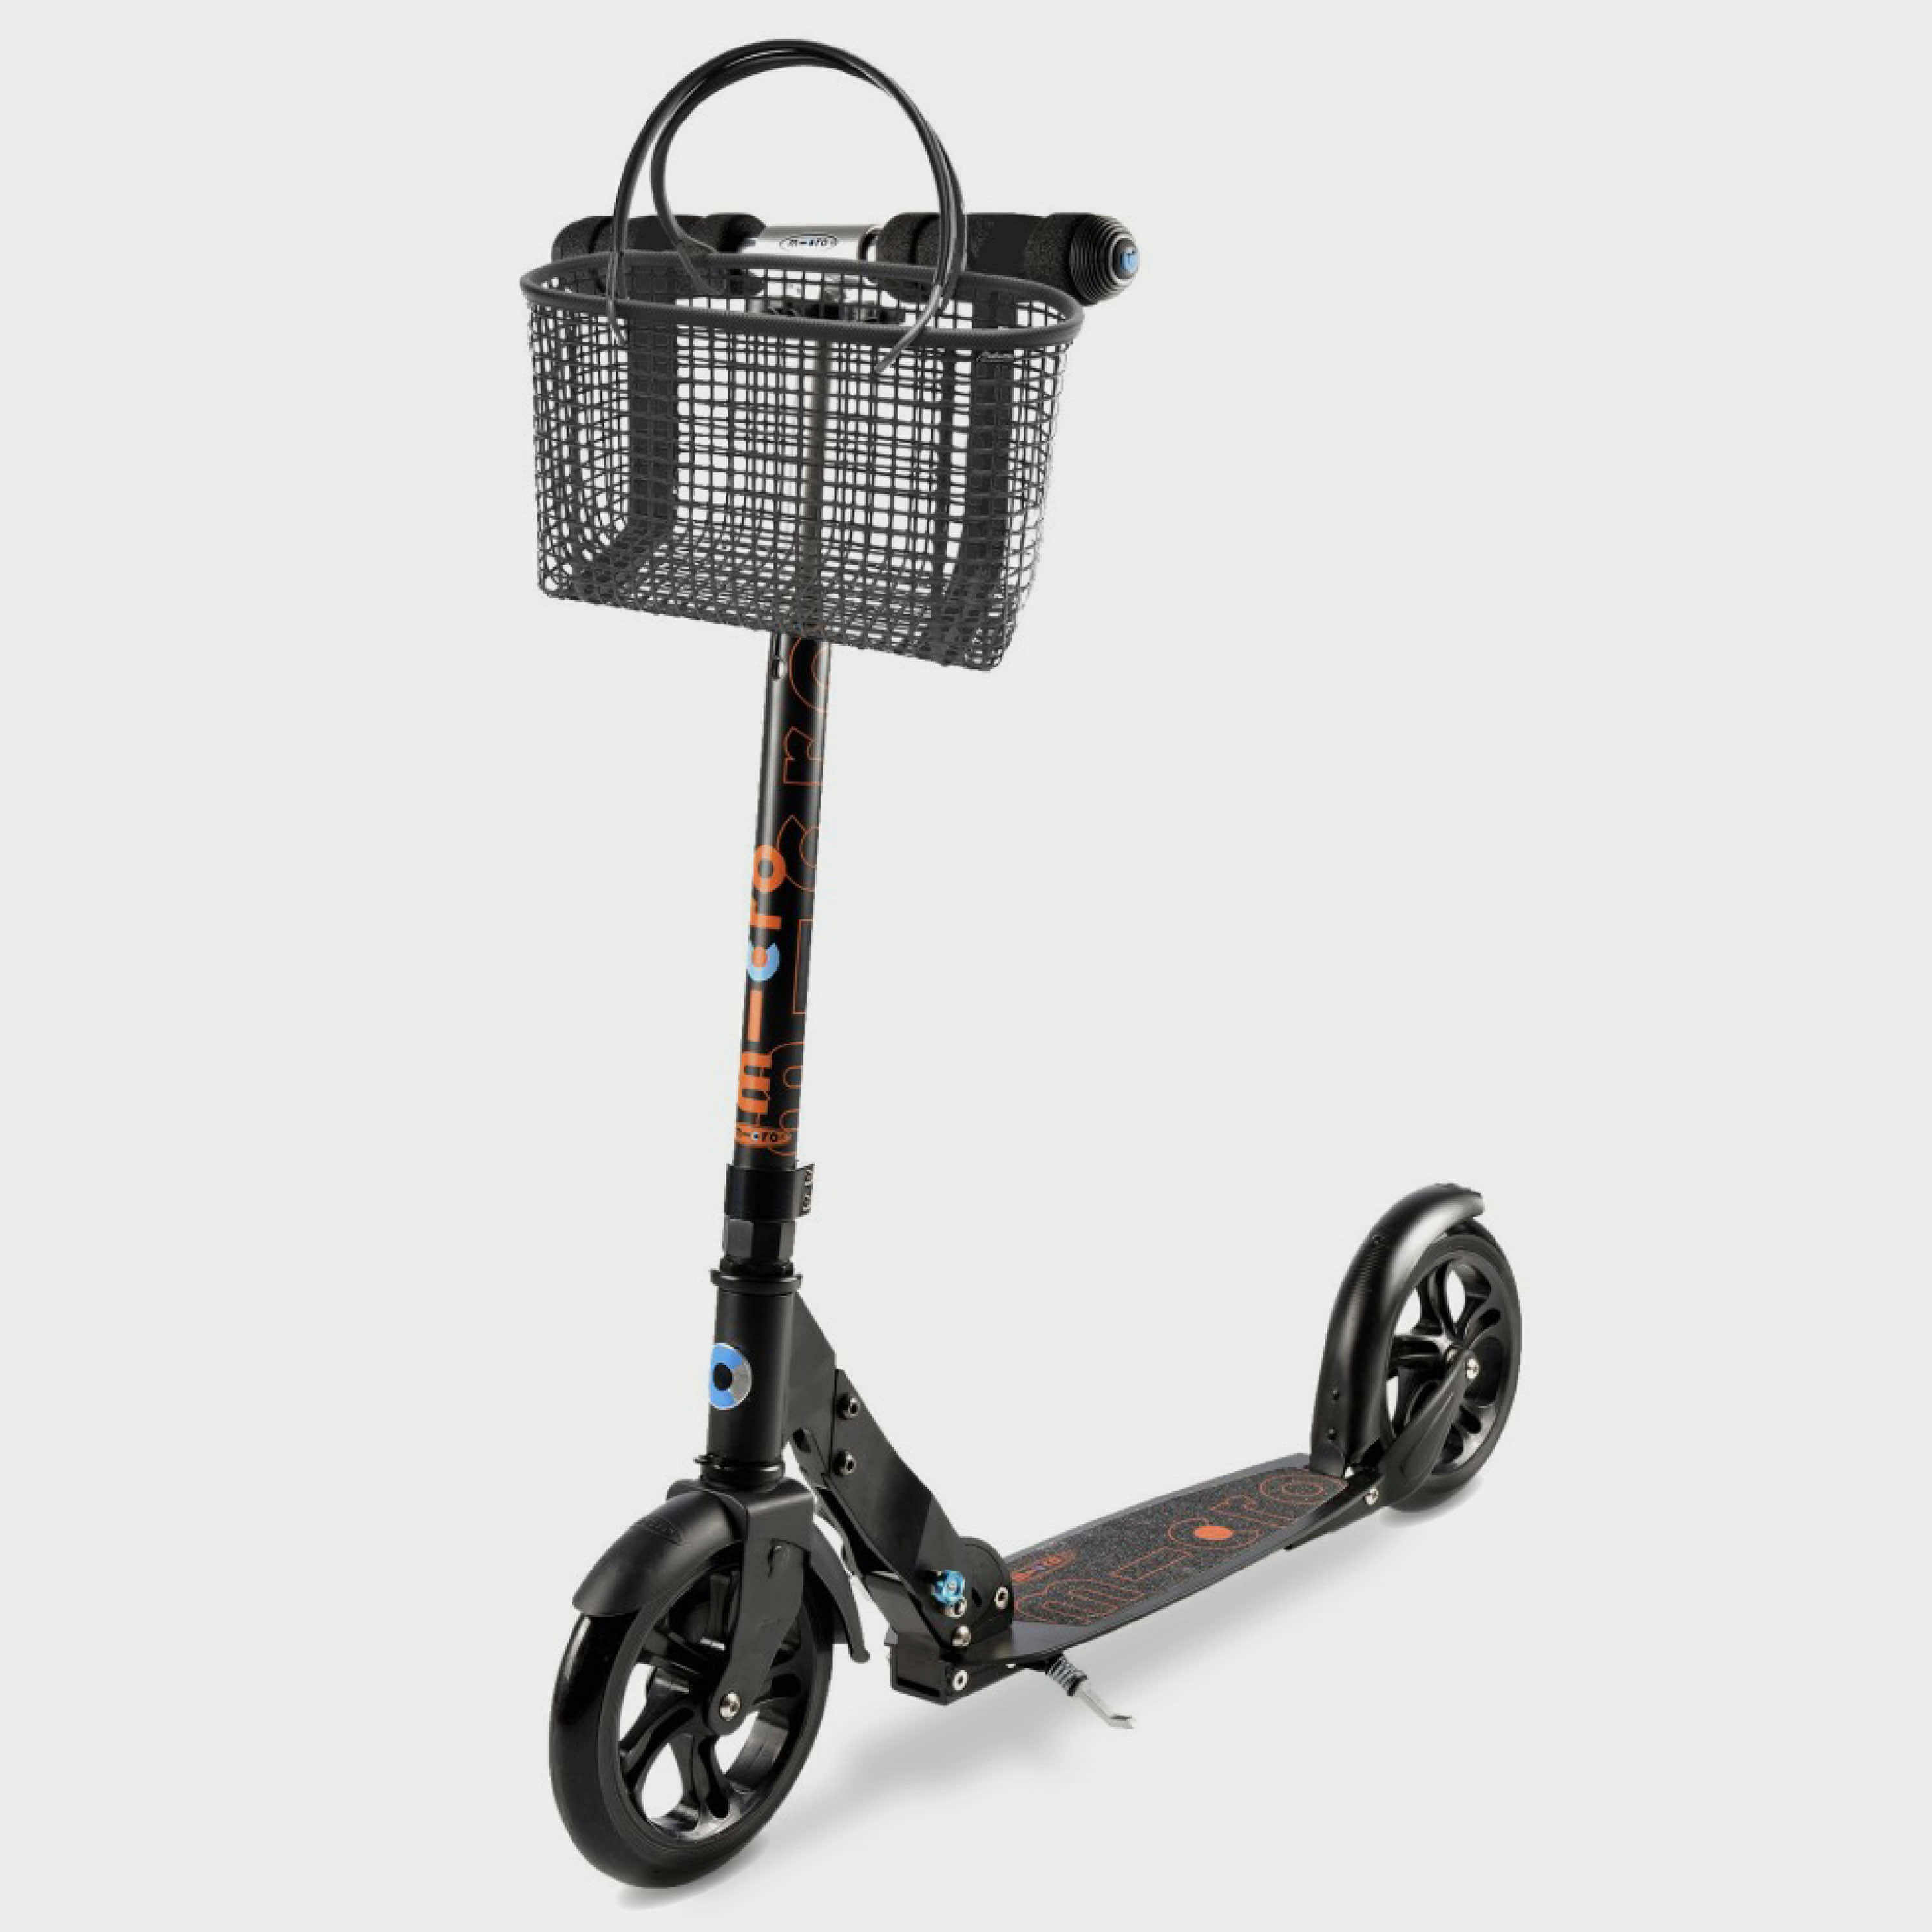 Universal Bike Scooter Basket | Micro Adult helmets and